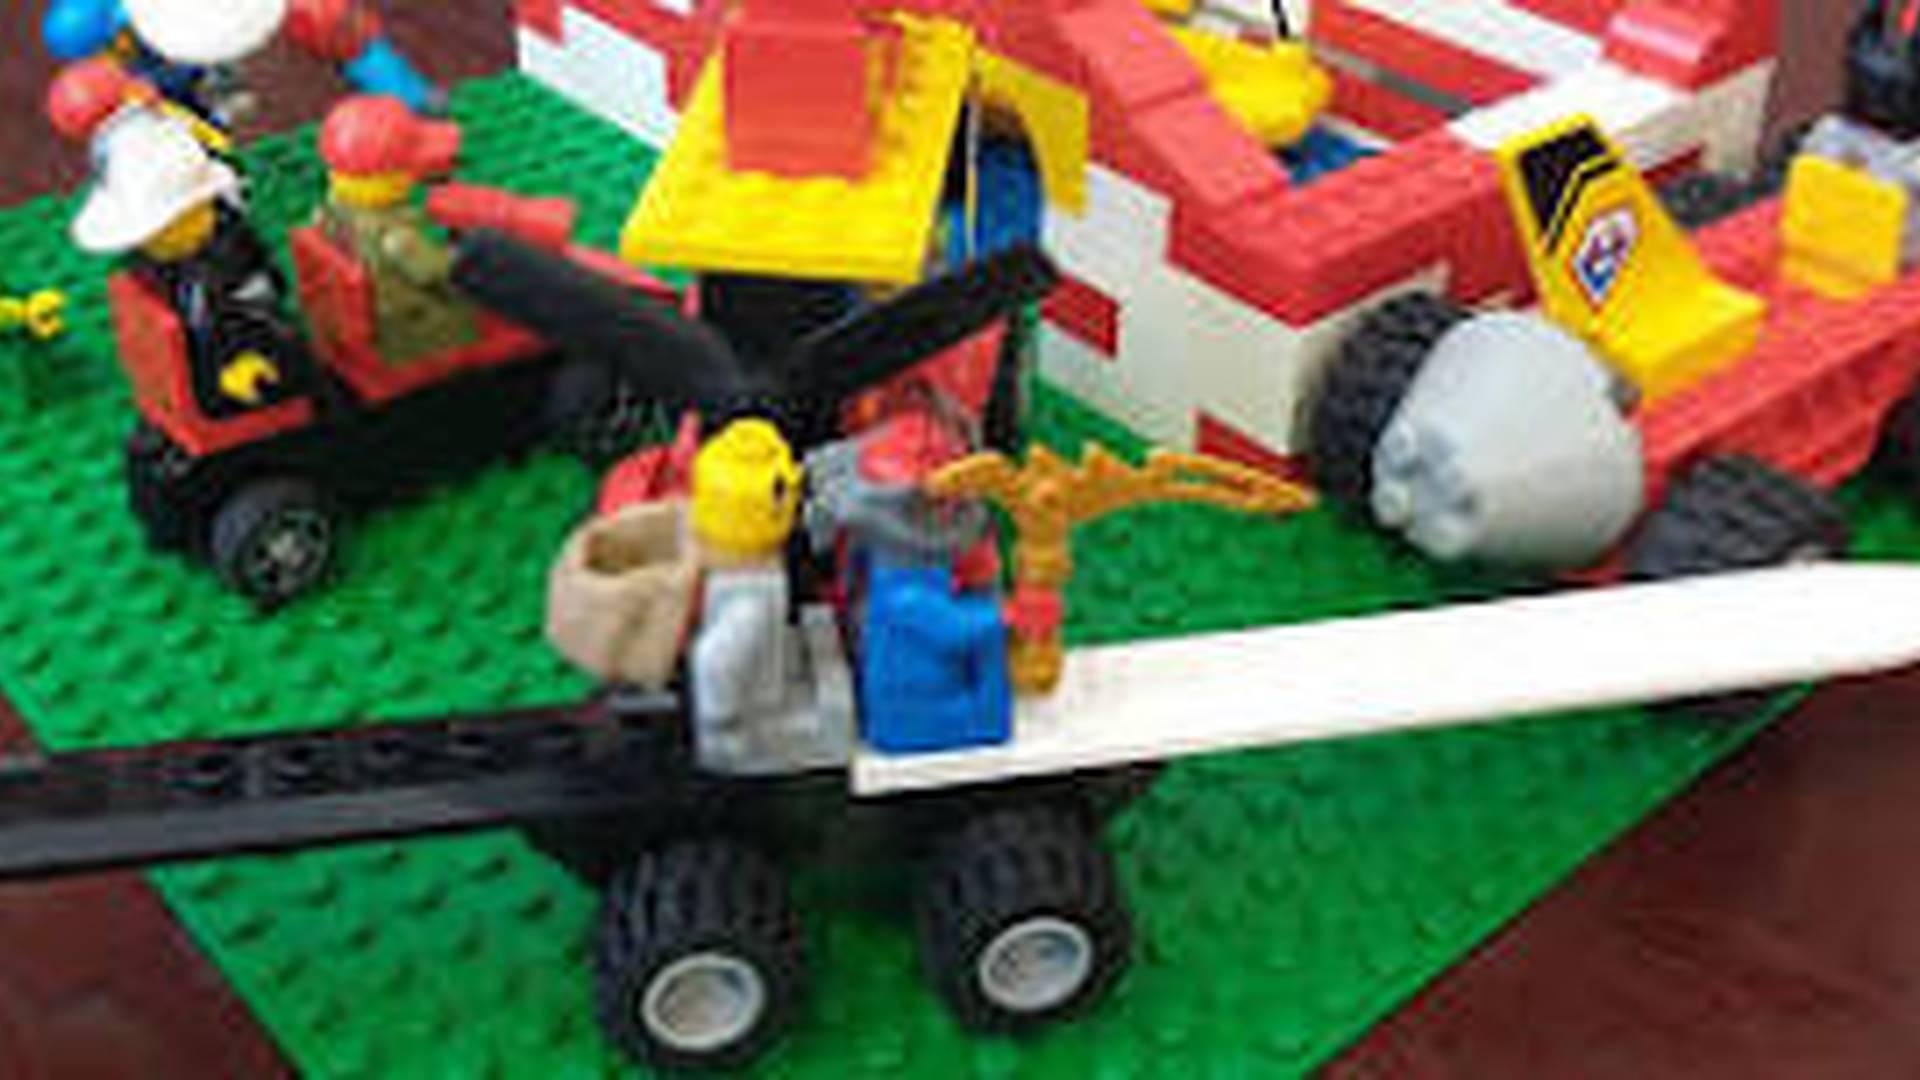 Lego Club at the Library photo